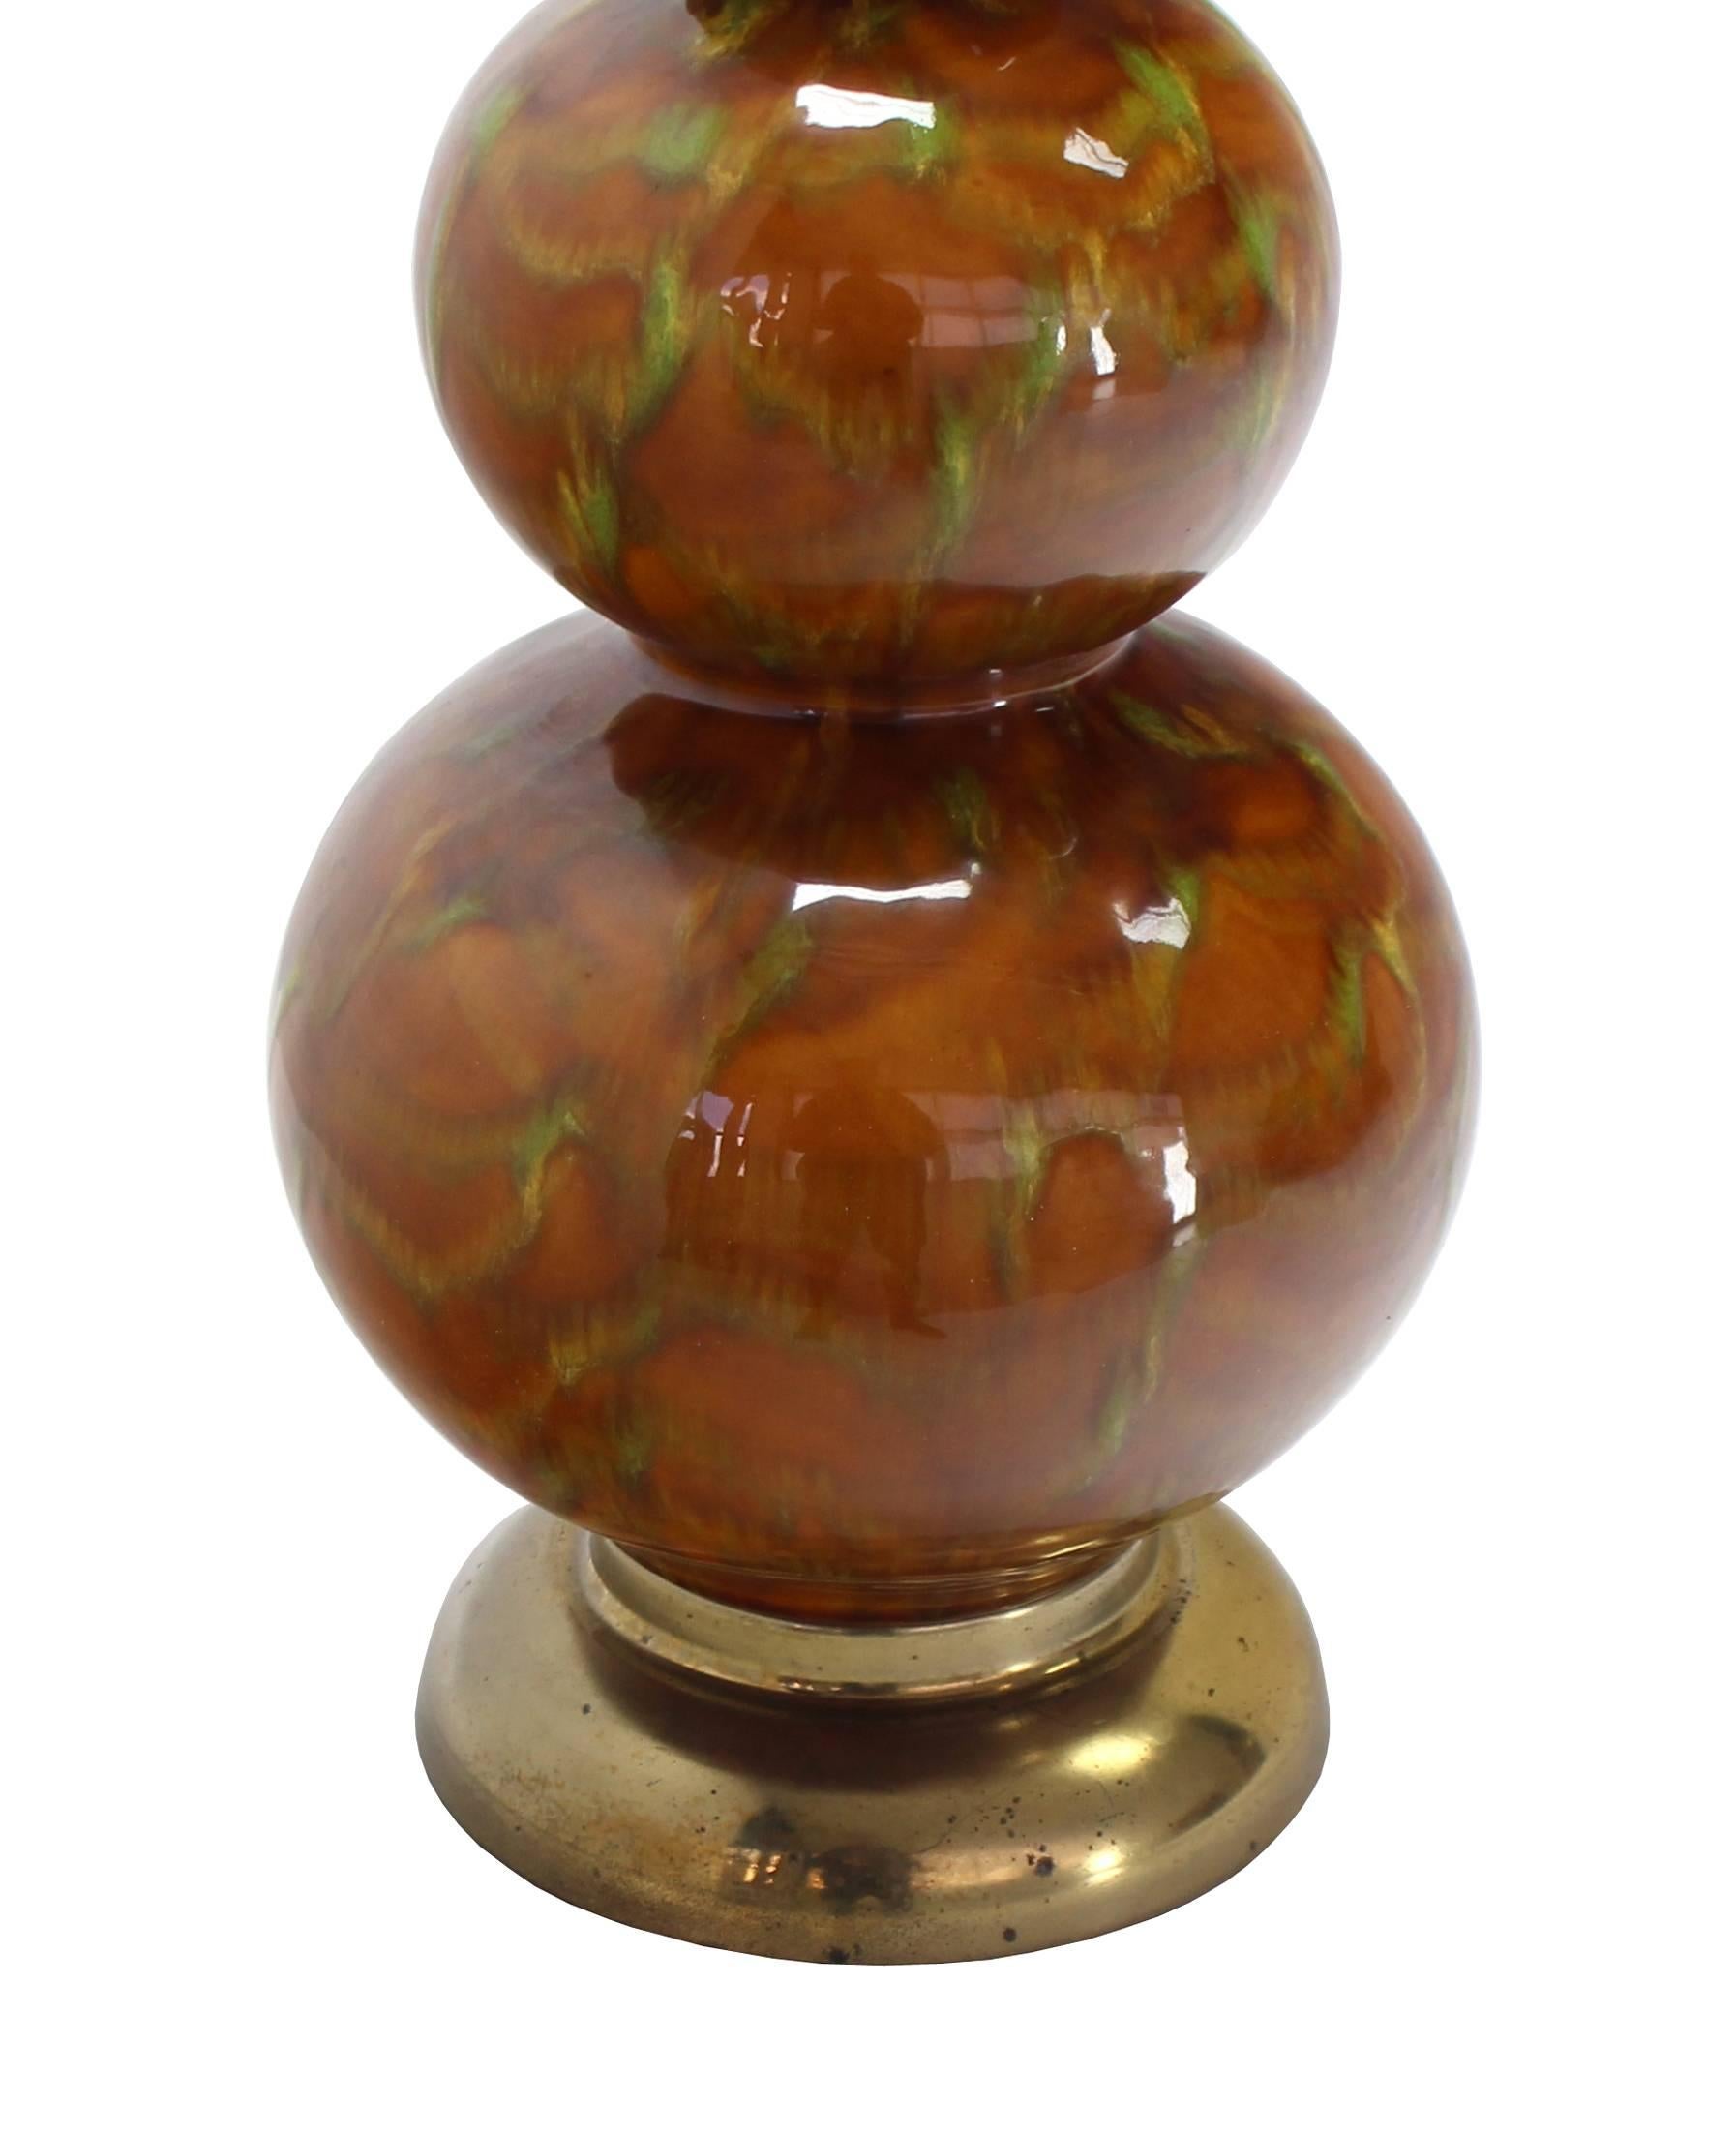 Mid-Century Modern Glazed Art Pottery Table Lamp In Excellent Condition For Sale In Rockaway, NJ